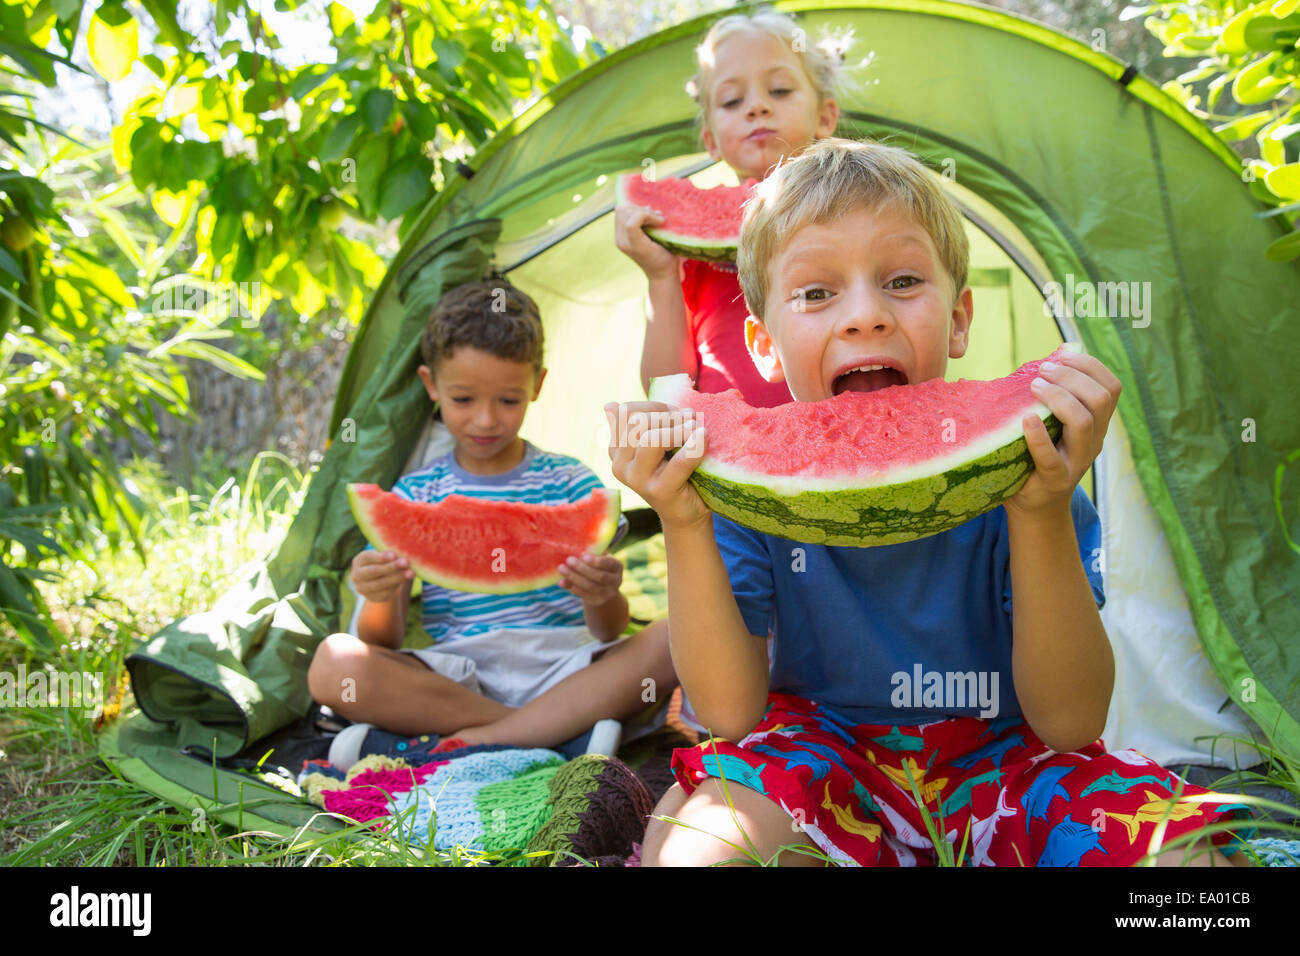 Three children eating large watermelon slices in garden tent Stock Photo